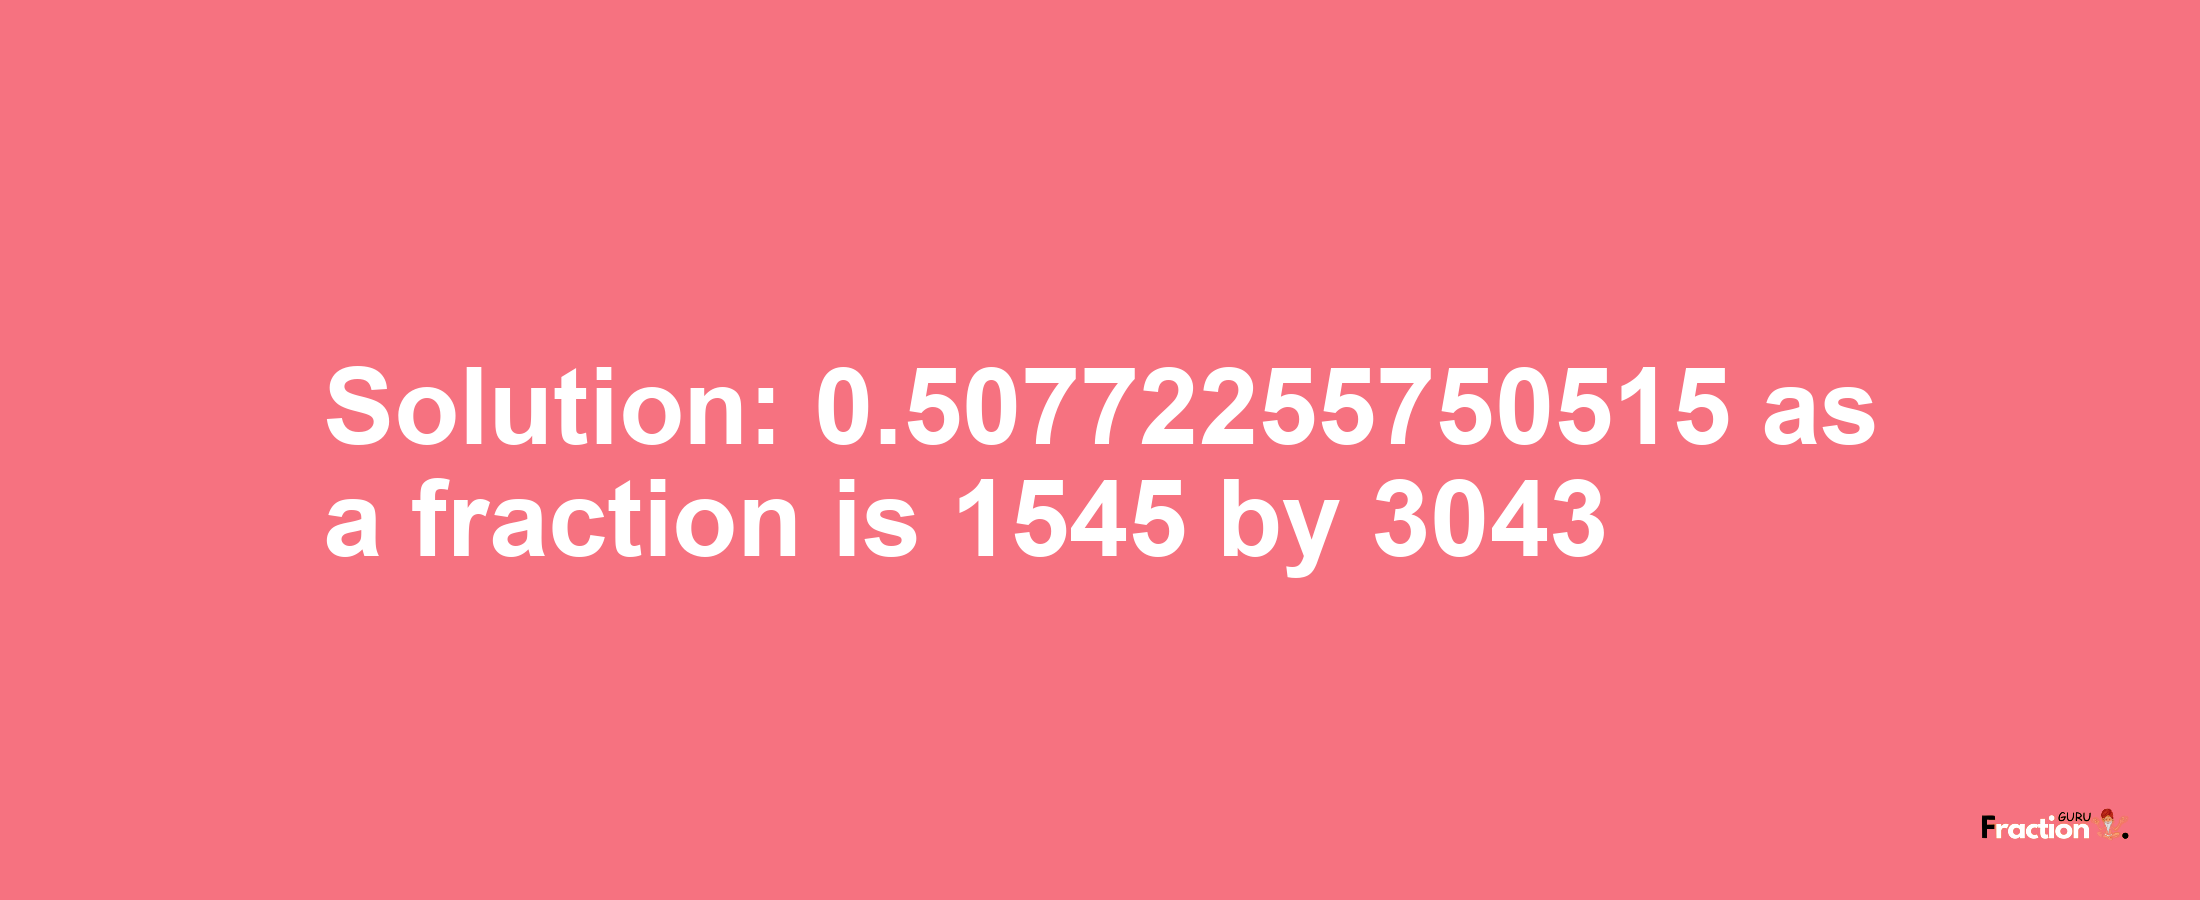 Solution:0.50772255750515 as a fraction is 1545/3043